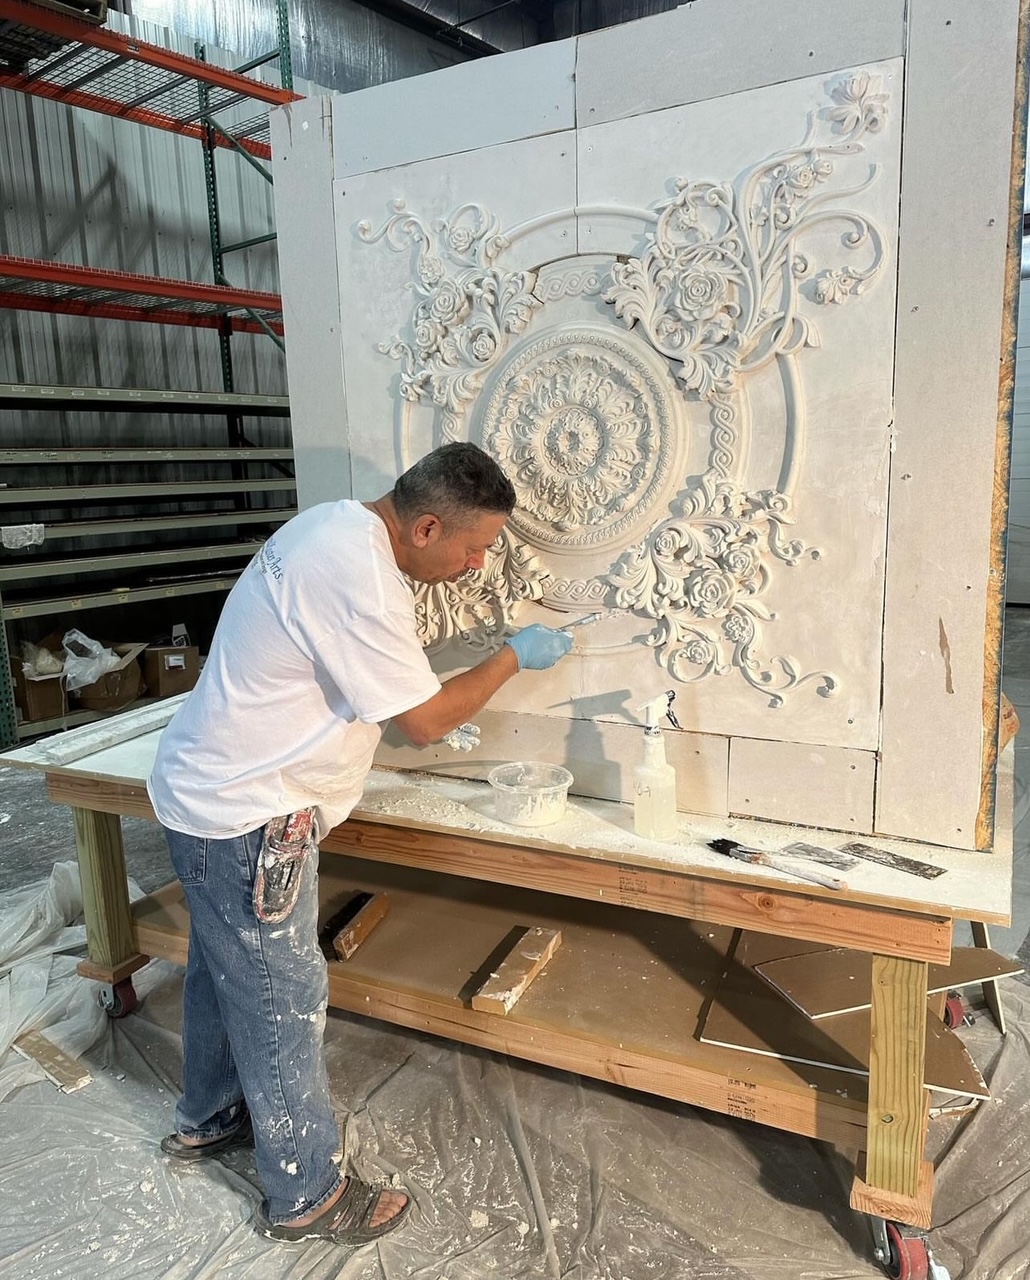 Crafting Exquisite Plaster Artistry, One Wall at a Time.